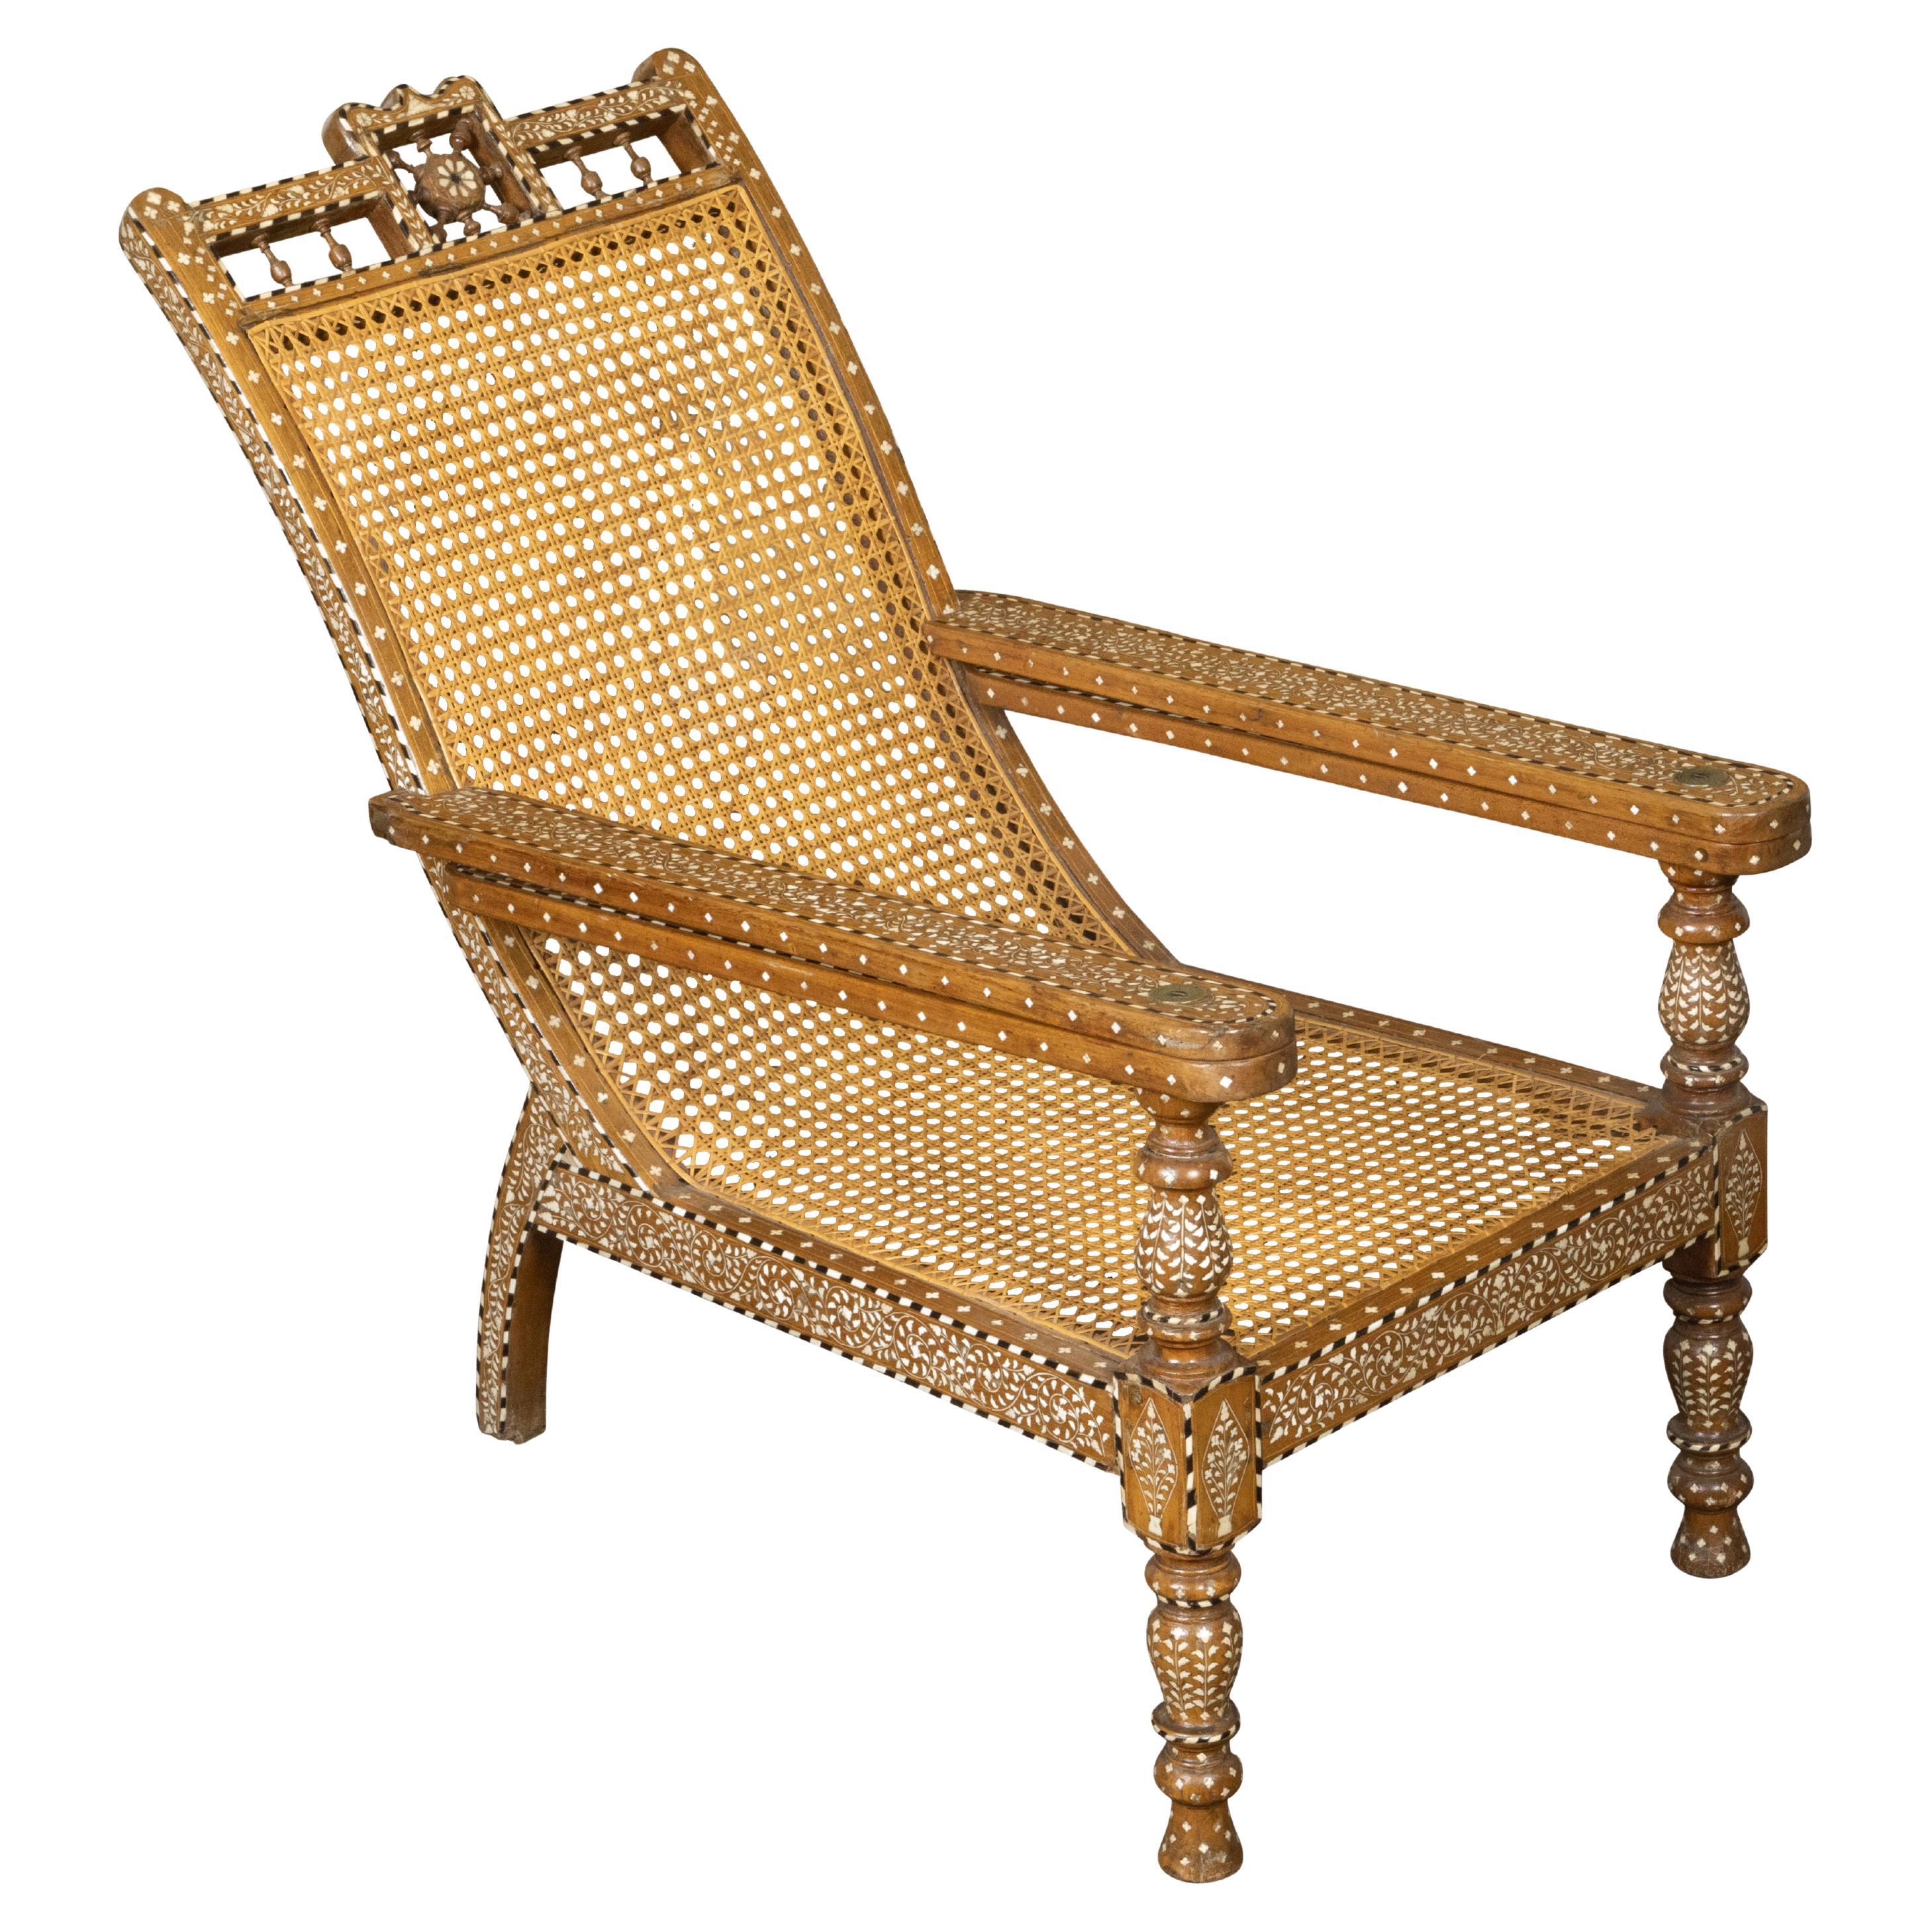 Anglo-Indian Inlaid Plantation Chair with Scrolling Foliage and Extending Arms For Sale